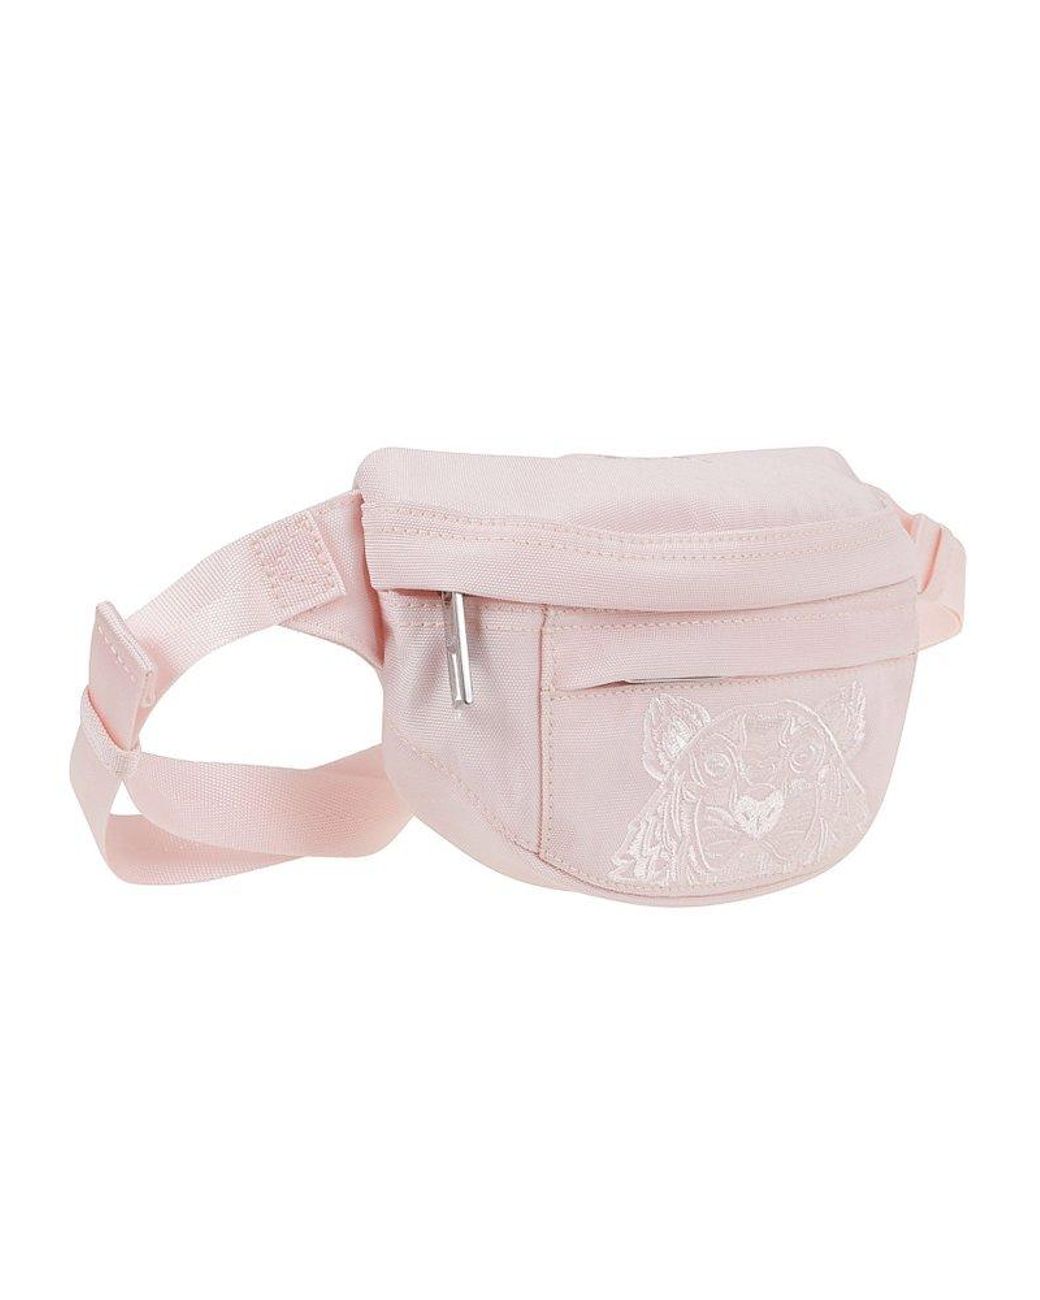 KENZO Synthetic Tiger Embroidered Zipped Small Belt Bag in Pink | Lyst